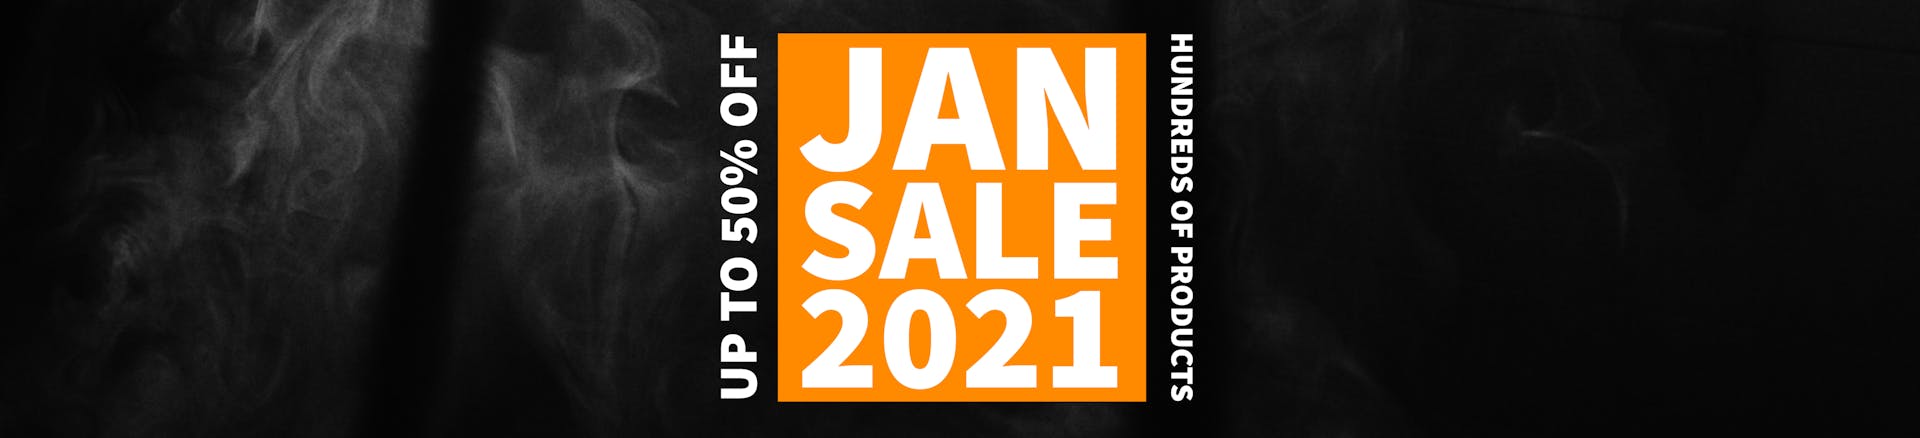 Airsoft Jan Sale 2021 up to 50% off